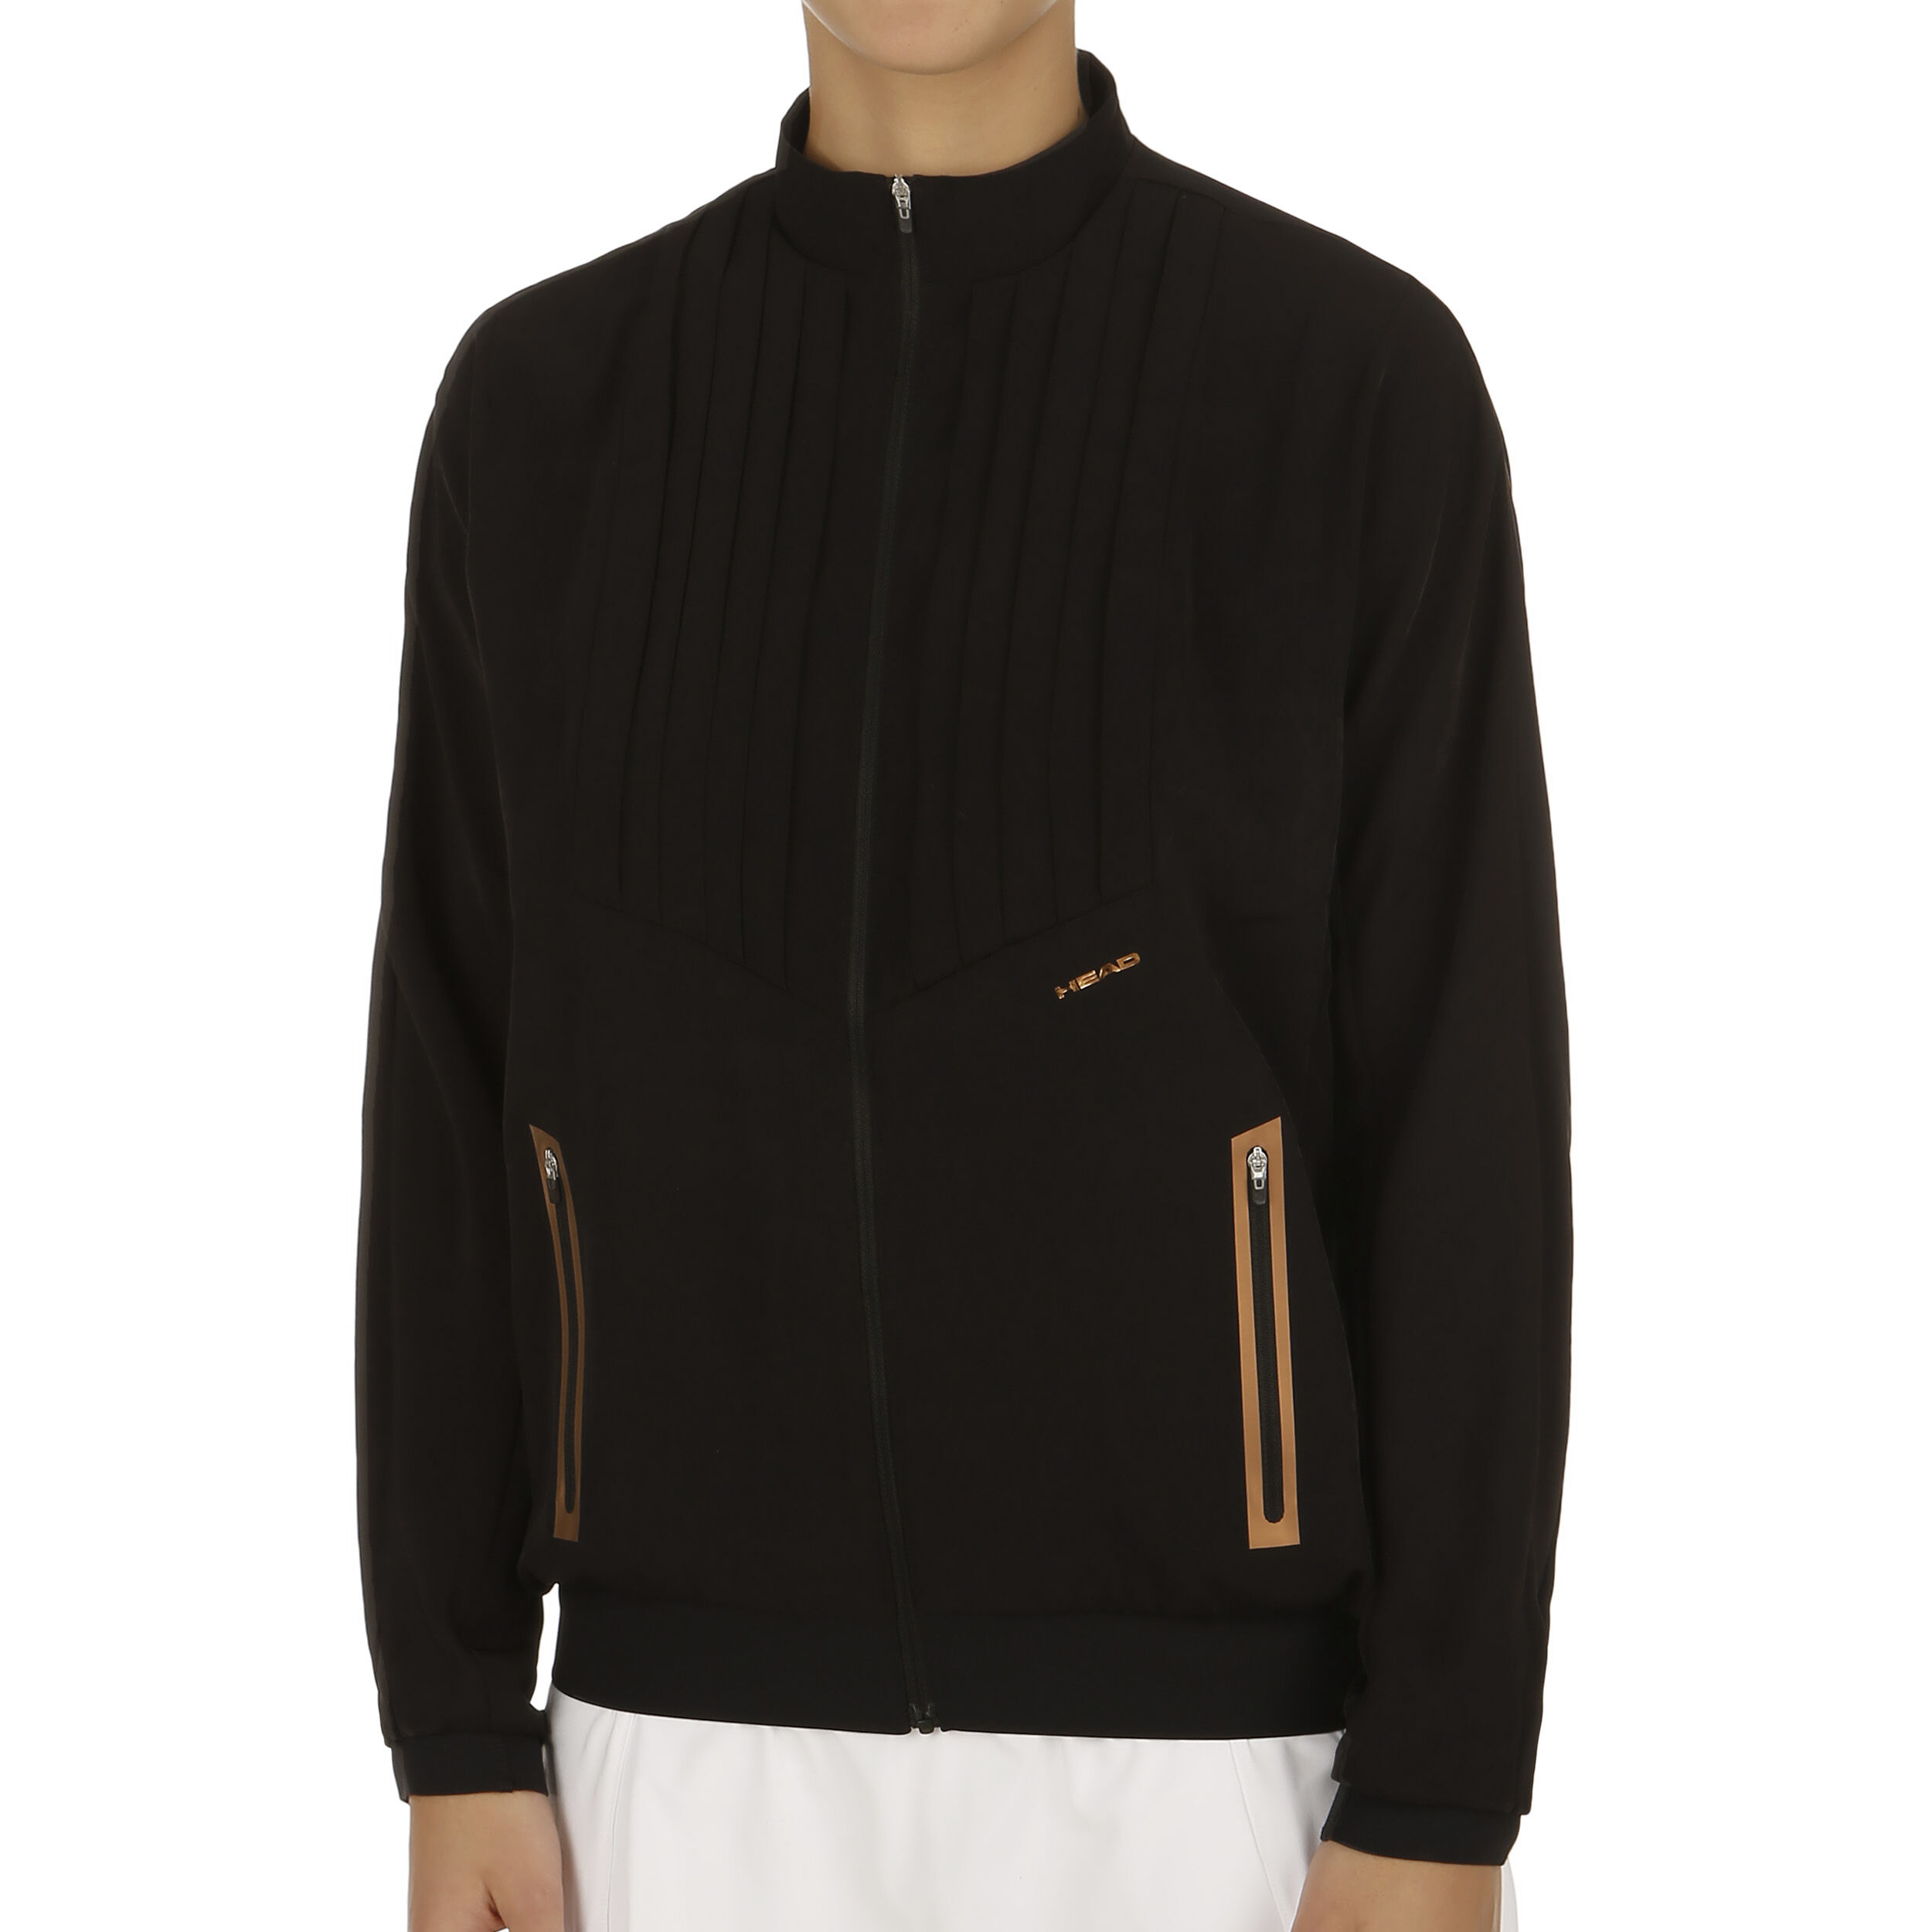 Head Mujer Chaqueta Performance Couture Jacket